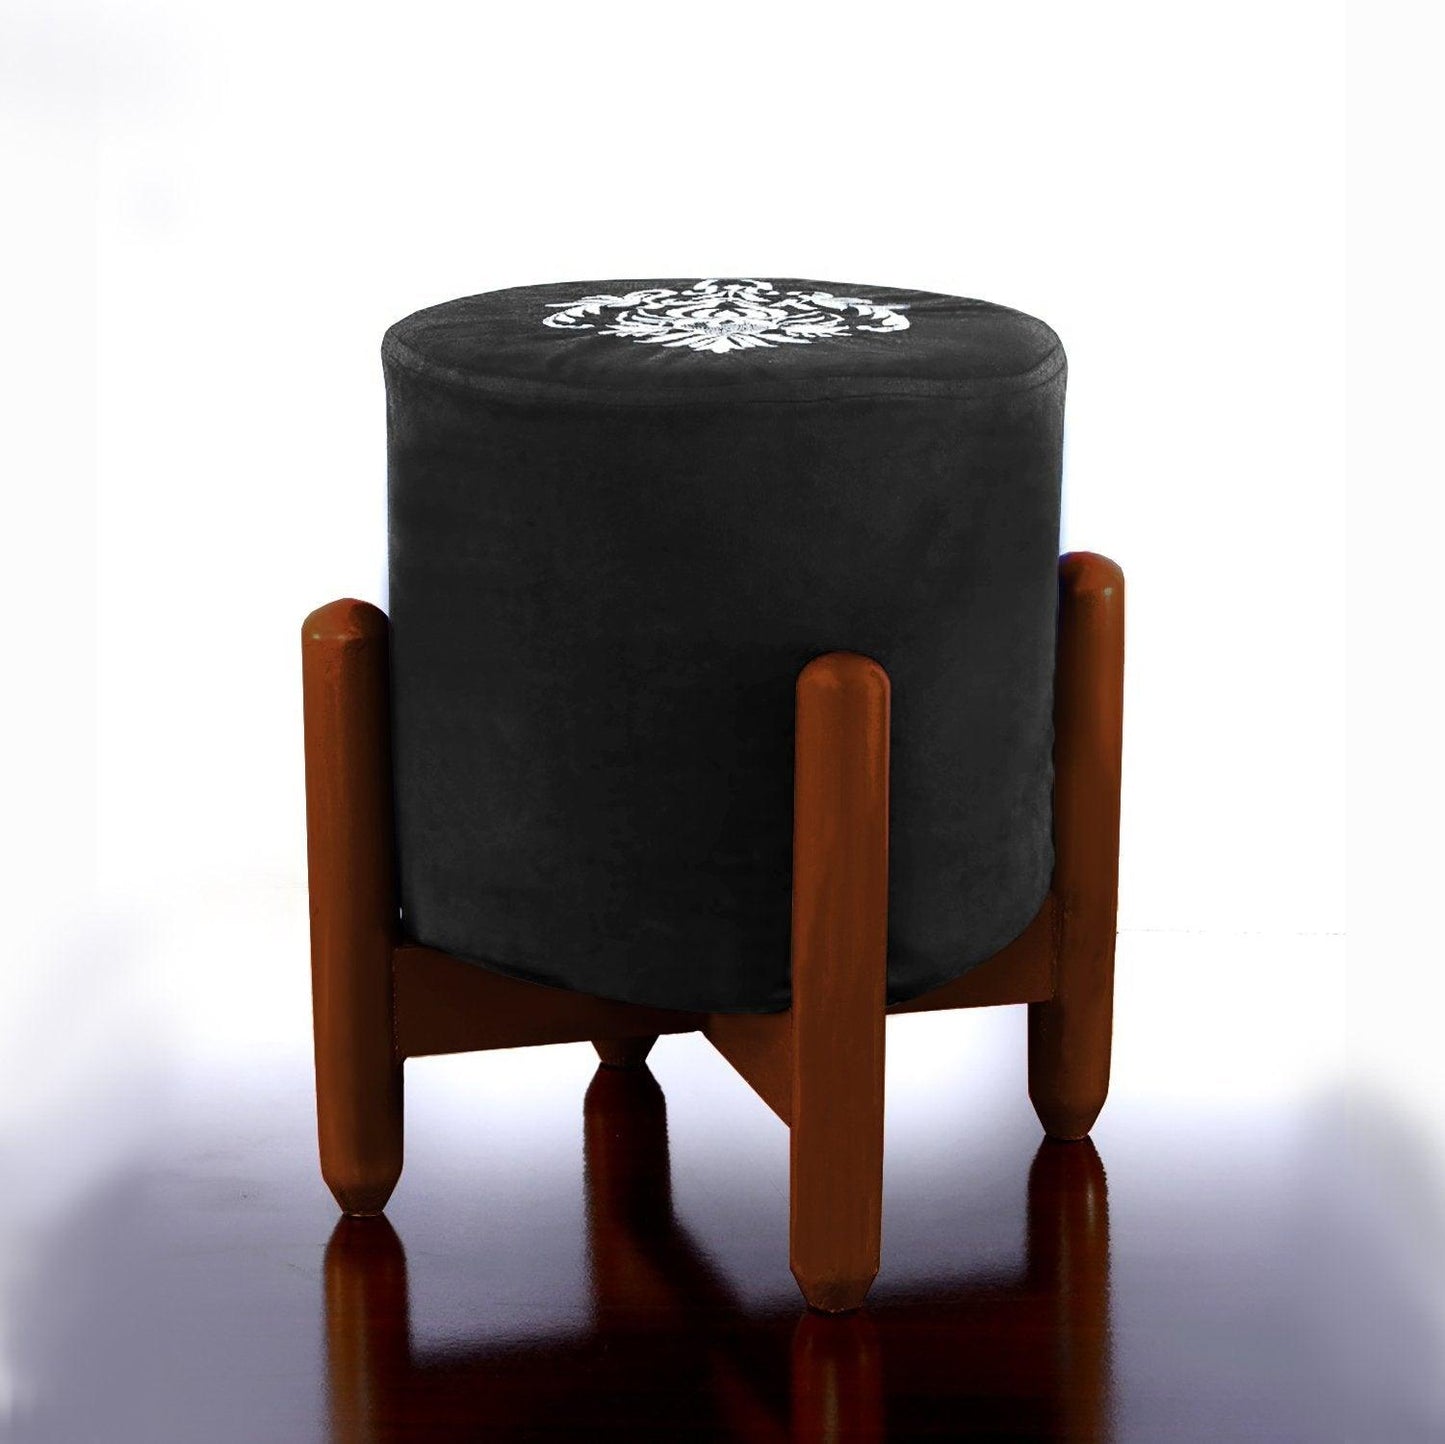 Drone Shape Round stool With Embroidery -385 - 92Bedding